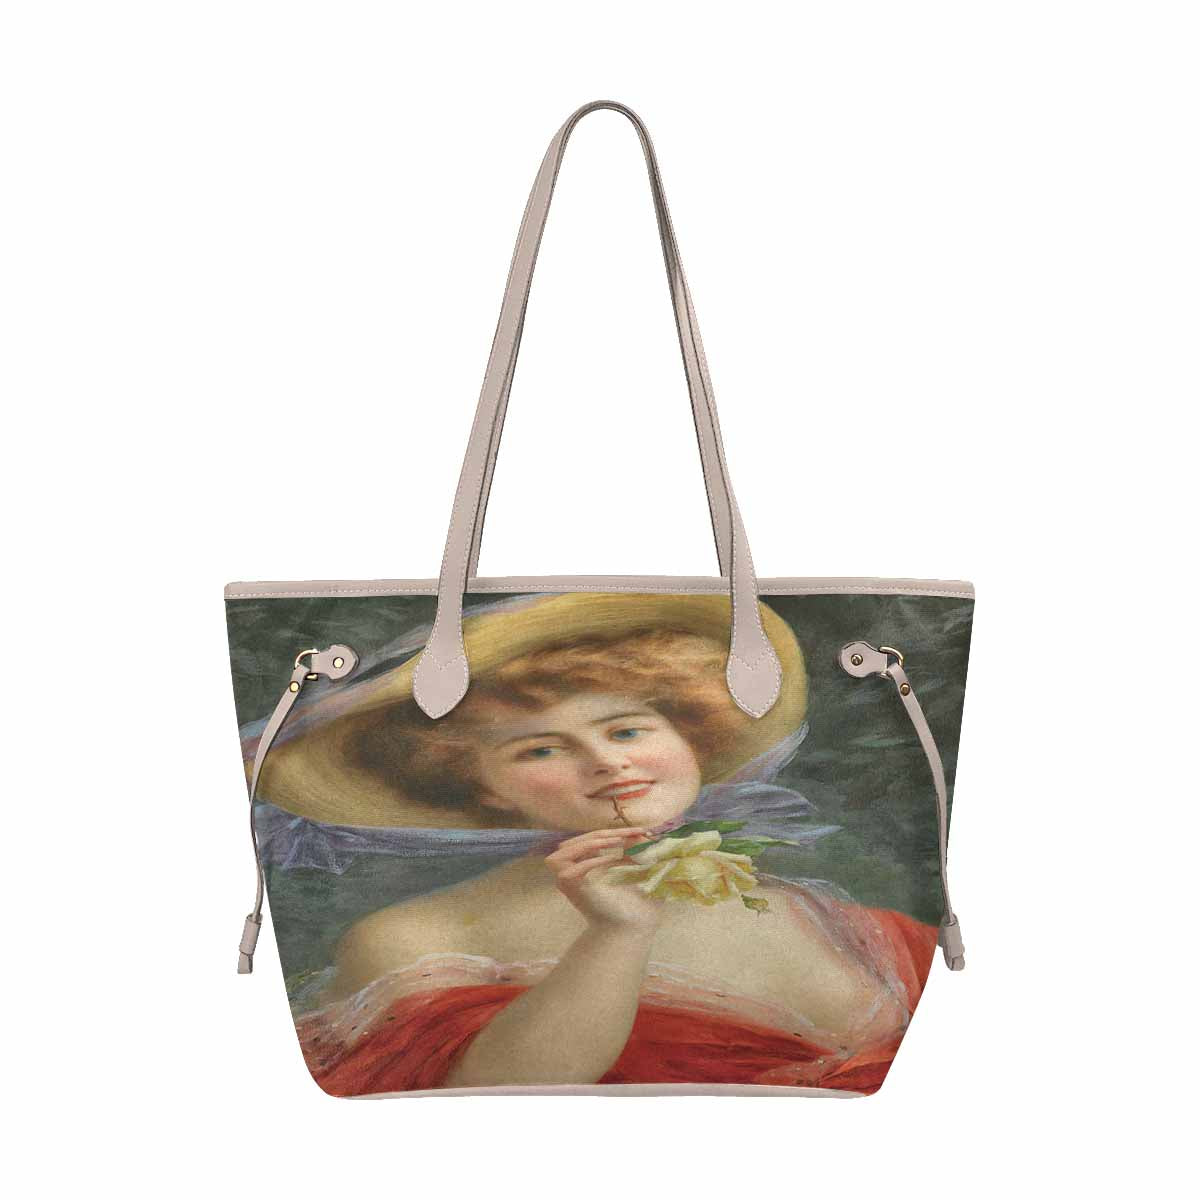 Victorian Lady Design Handbag, Model 1695361, Young Girl With A Rose, BEIGE/TAN TRIM